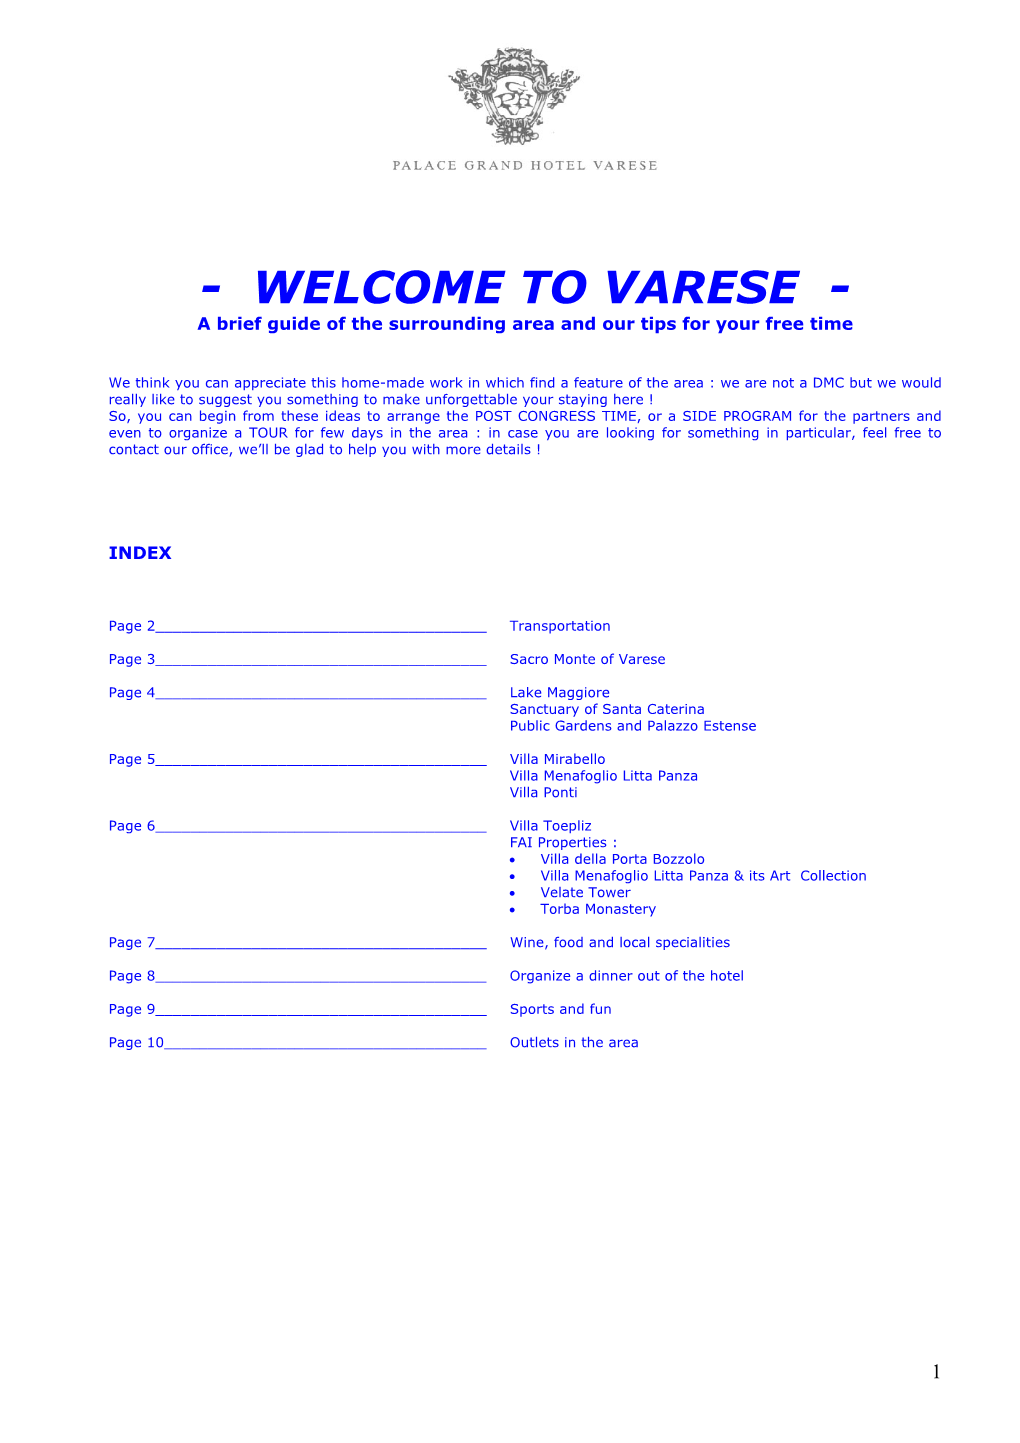 VARESE - a Brief Guide of the Surrounding Area and Our Tips for Your Free Time